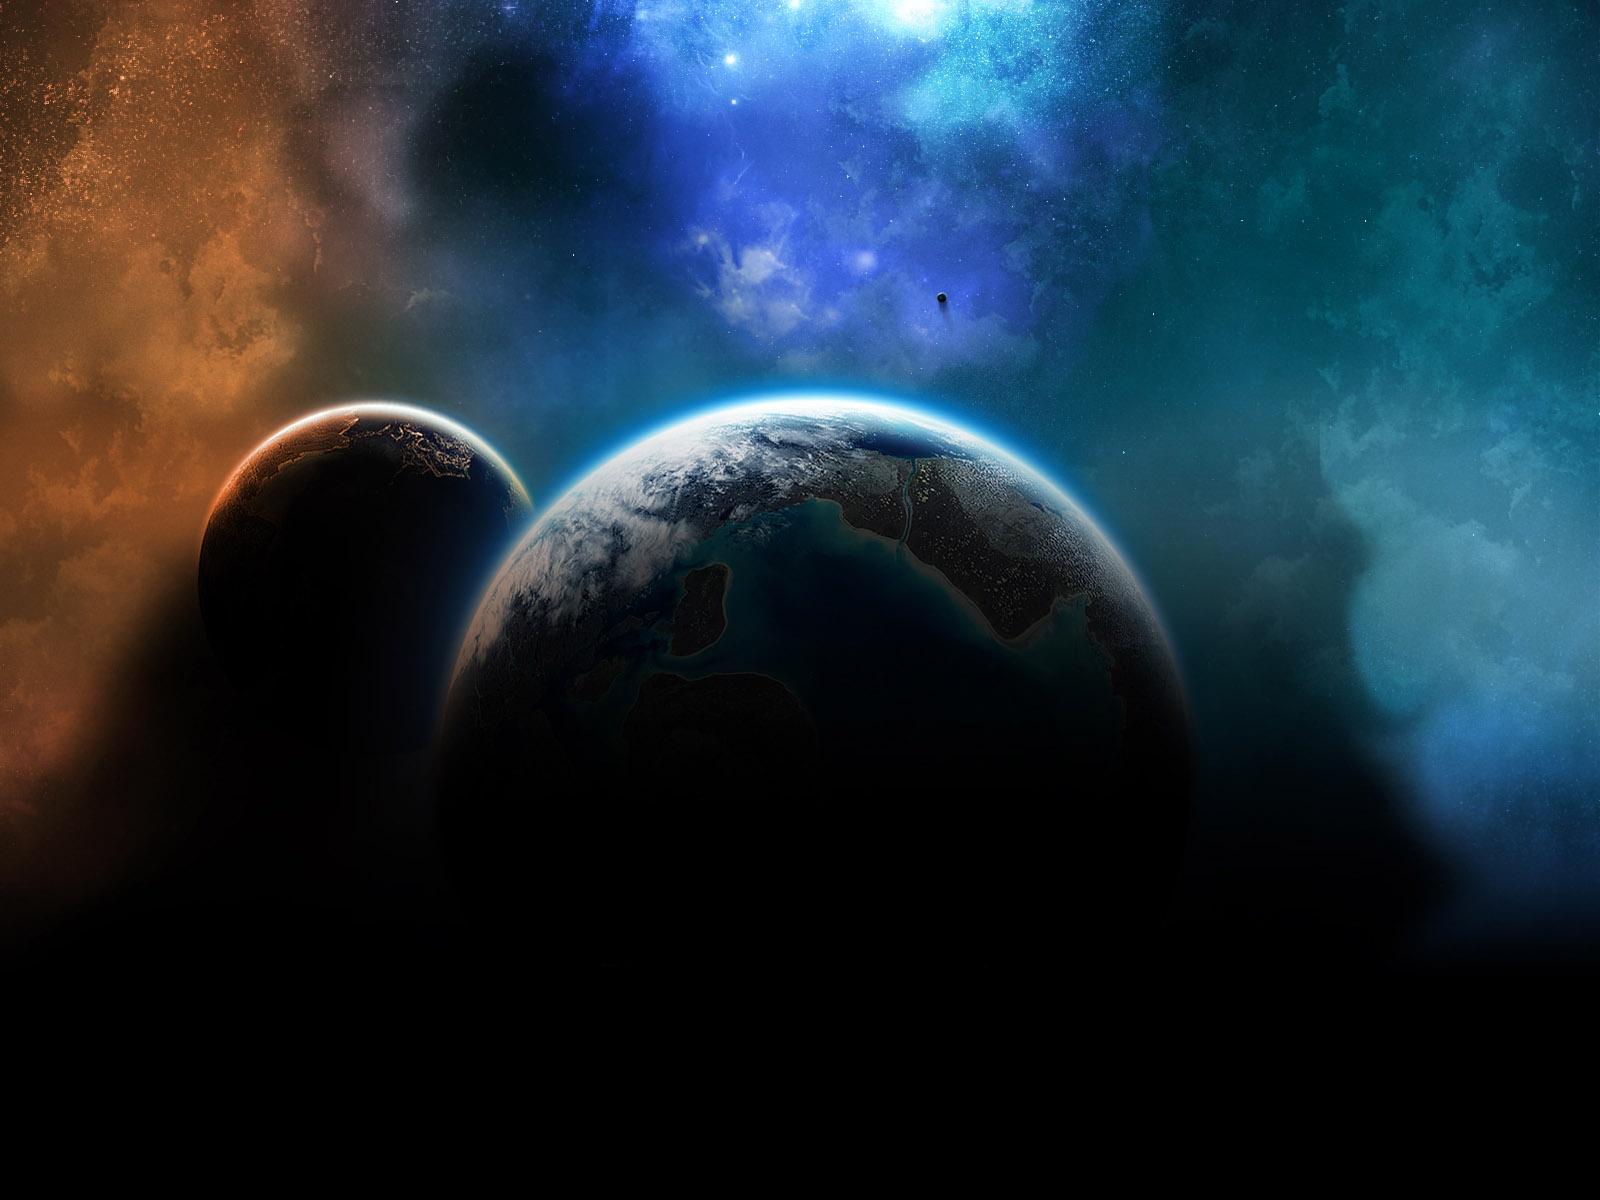 Universe Mystery Wallpaper in jpg format for free download